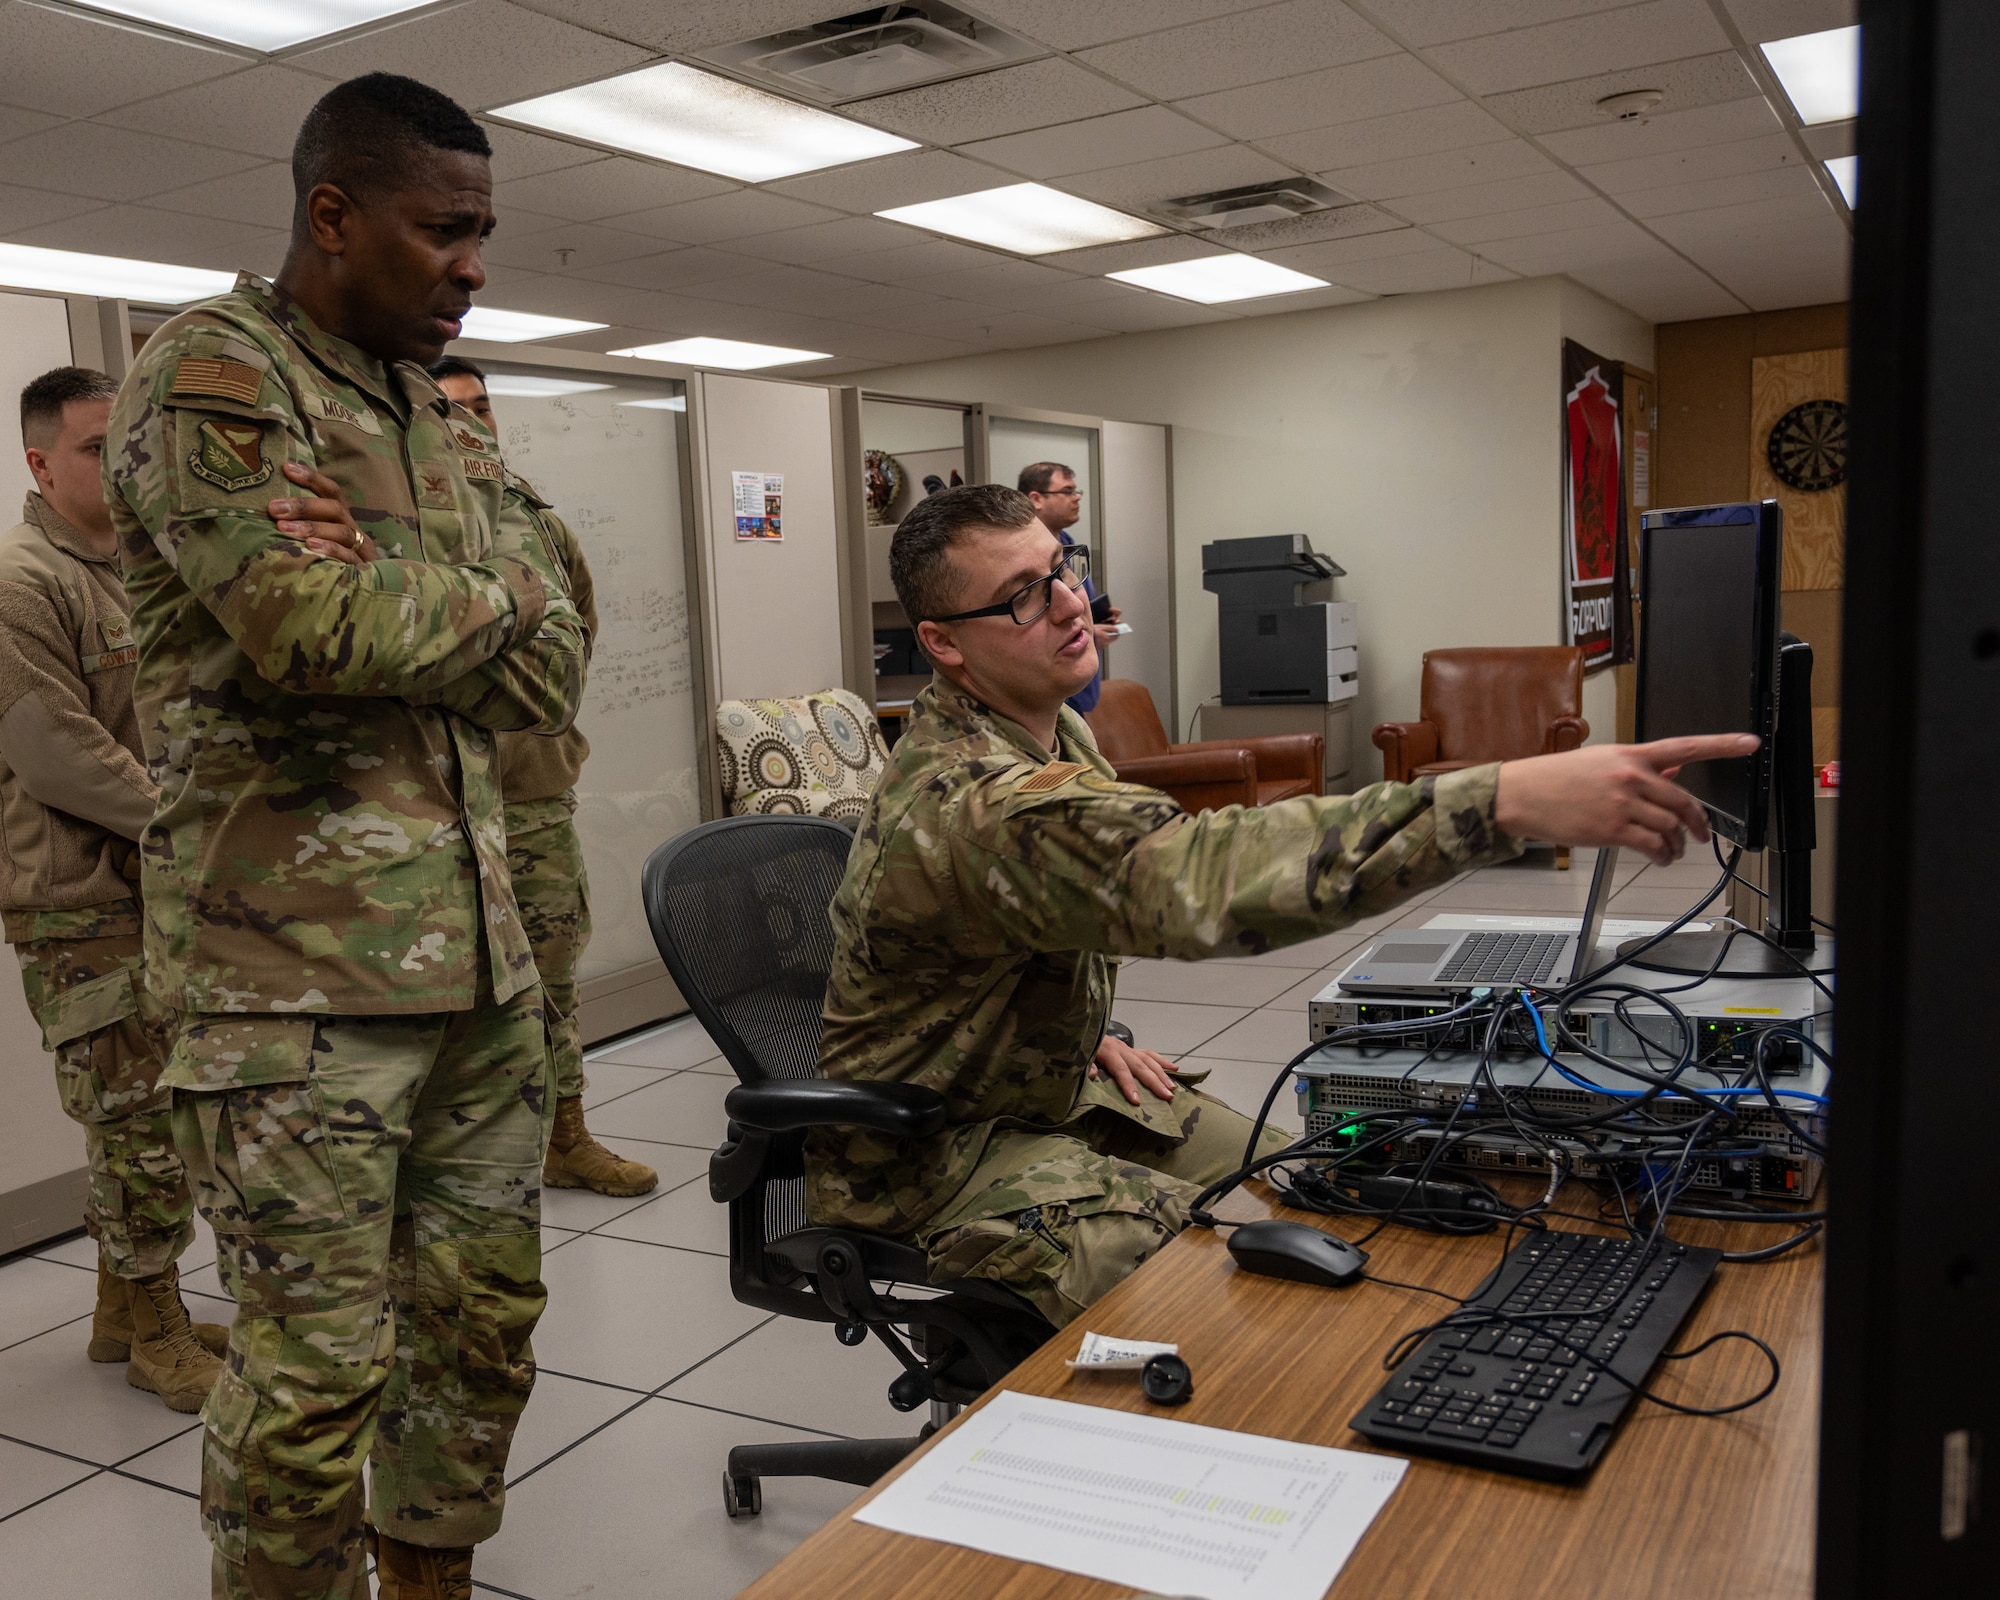 U.S. Air Force Senior Airmen Jerremy Huck, 47th Communications Squadron (CS) technician, shows Col. Robert Moore, 47th Mission Support Group commander, how to set up a new switch on a monitor at Laughlin Air Force Base, Texas, Feb. 6, 2024. The installation of new switches by the 47th CS improves digital security and data transfer speeds throughout the base. (U.S. Air Force photo by Staff Sgt. Nicholas Larsen)